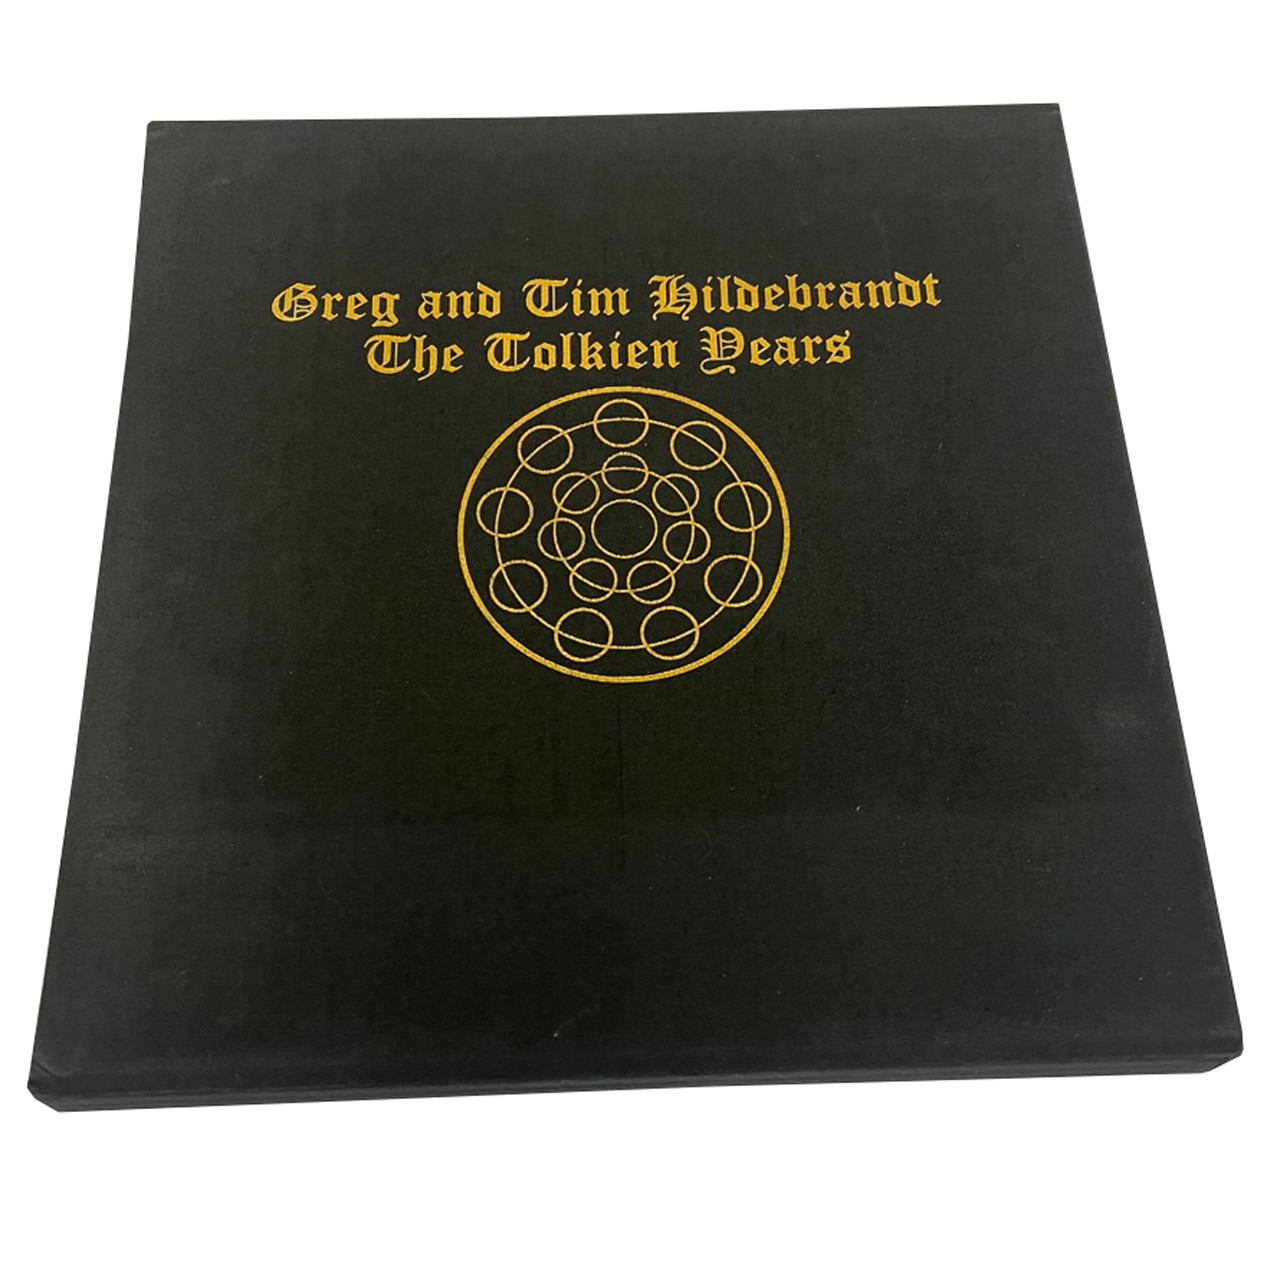 Greg and Tim Hildebrandt "The Tolkien Years" Slipcased Signed Limited First Edition No.  274 of 1,000 w/ Two Full Color Remarques